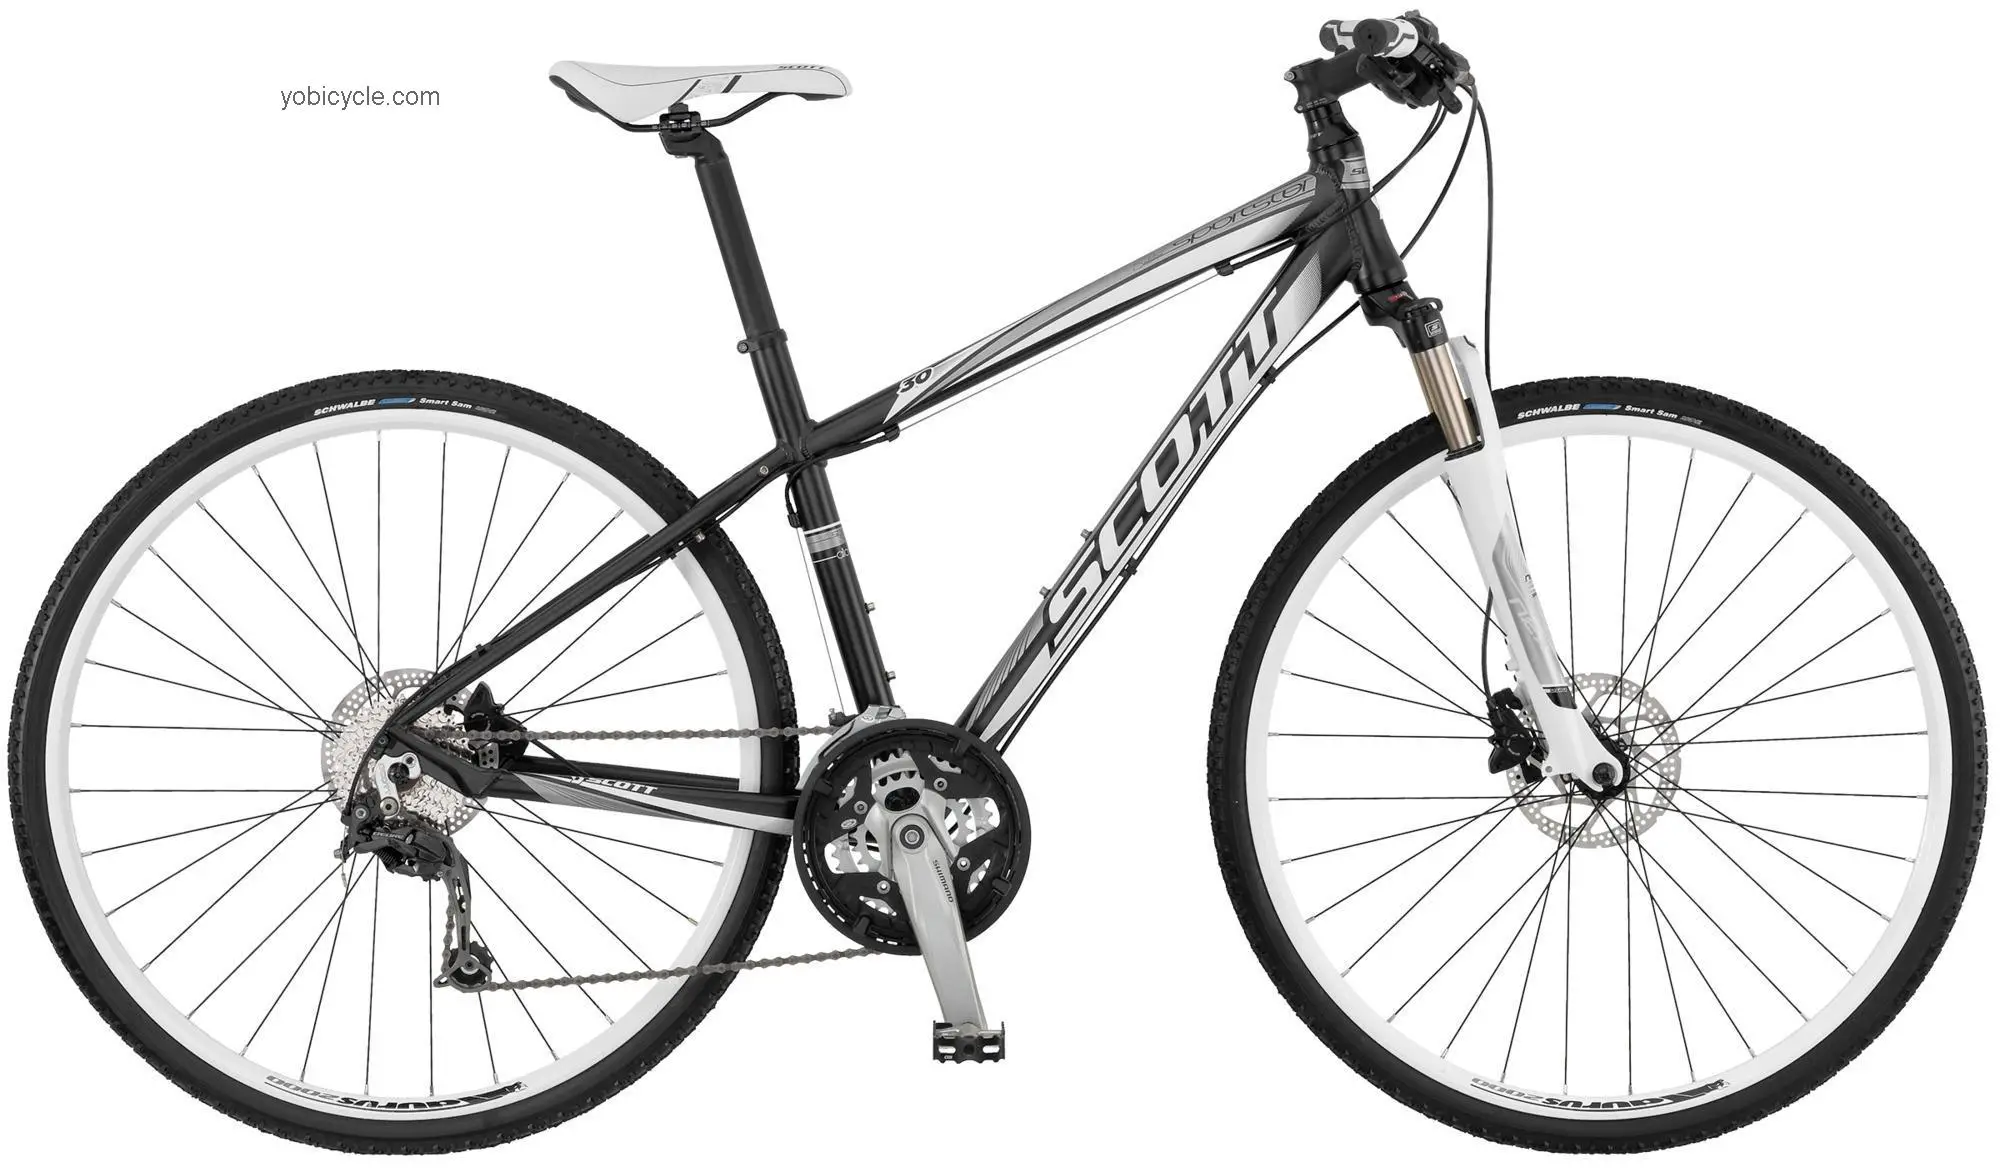 Scott Sportster 30 Solution 2011 comparison online with competitors